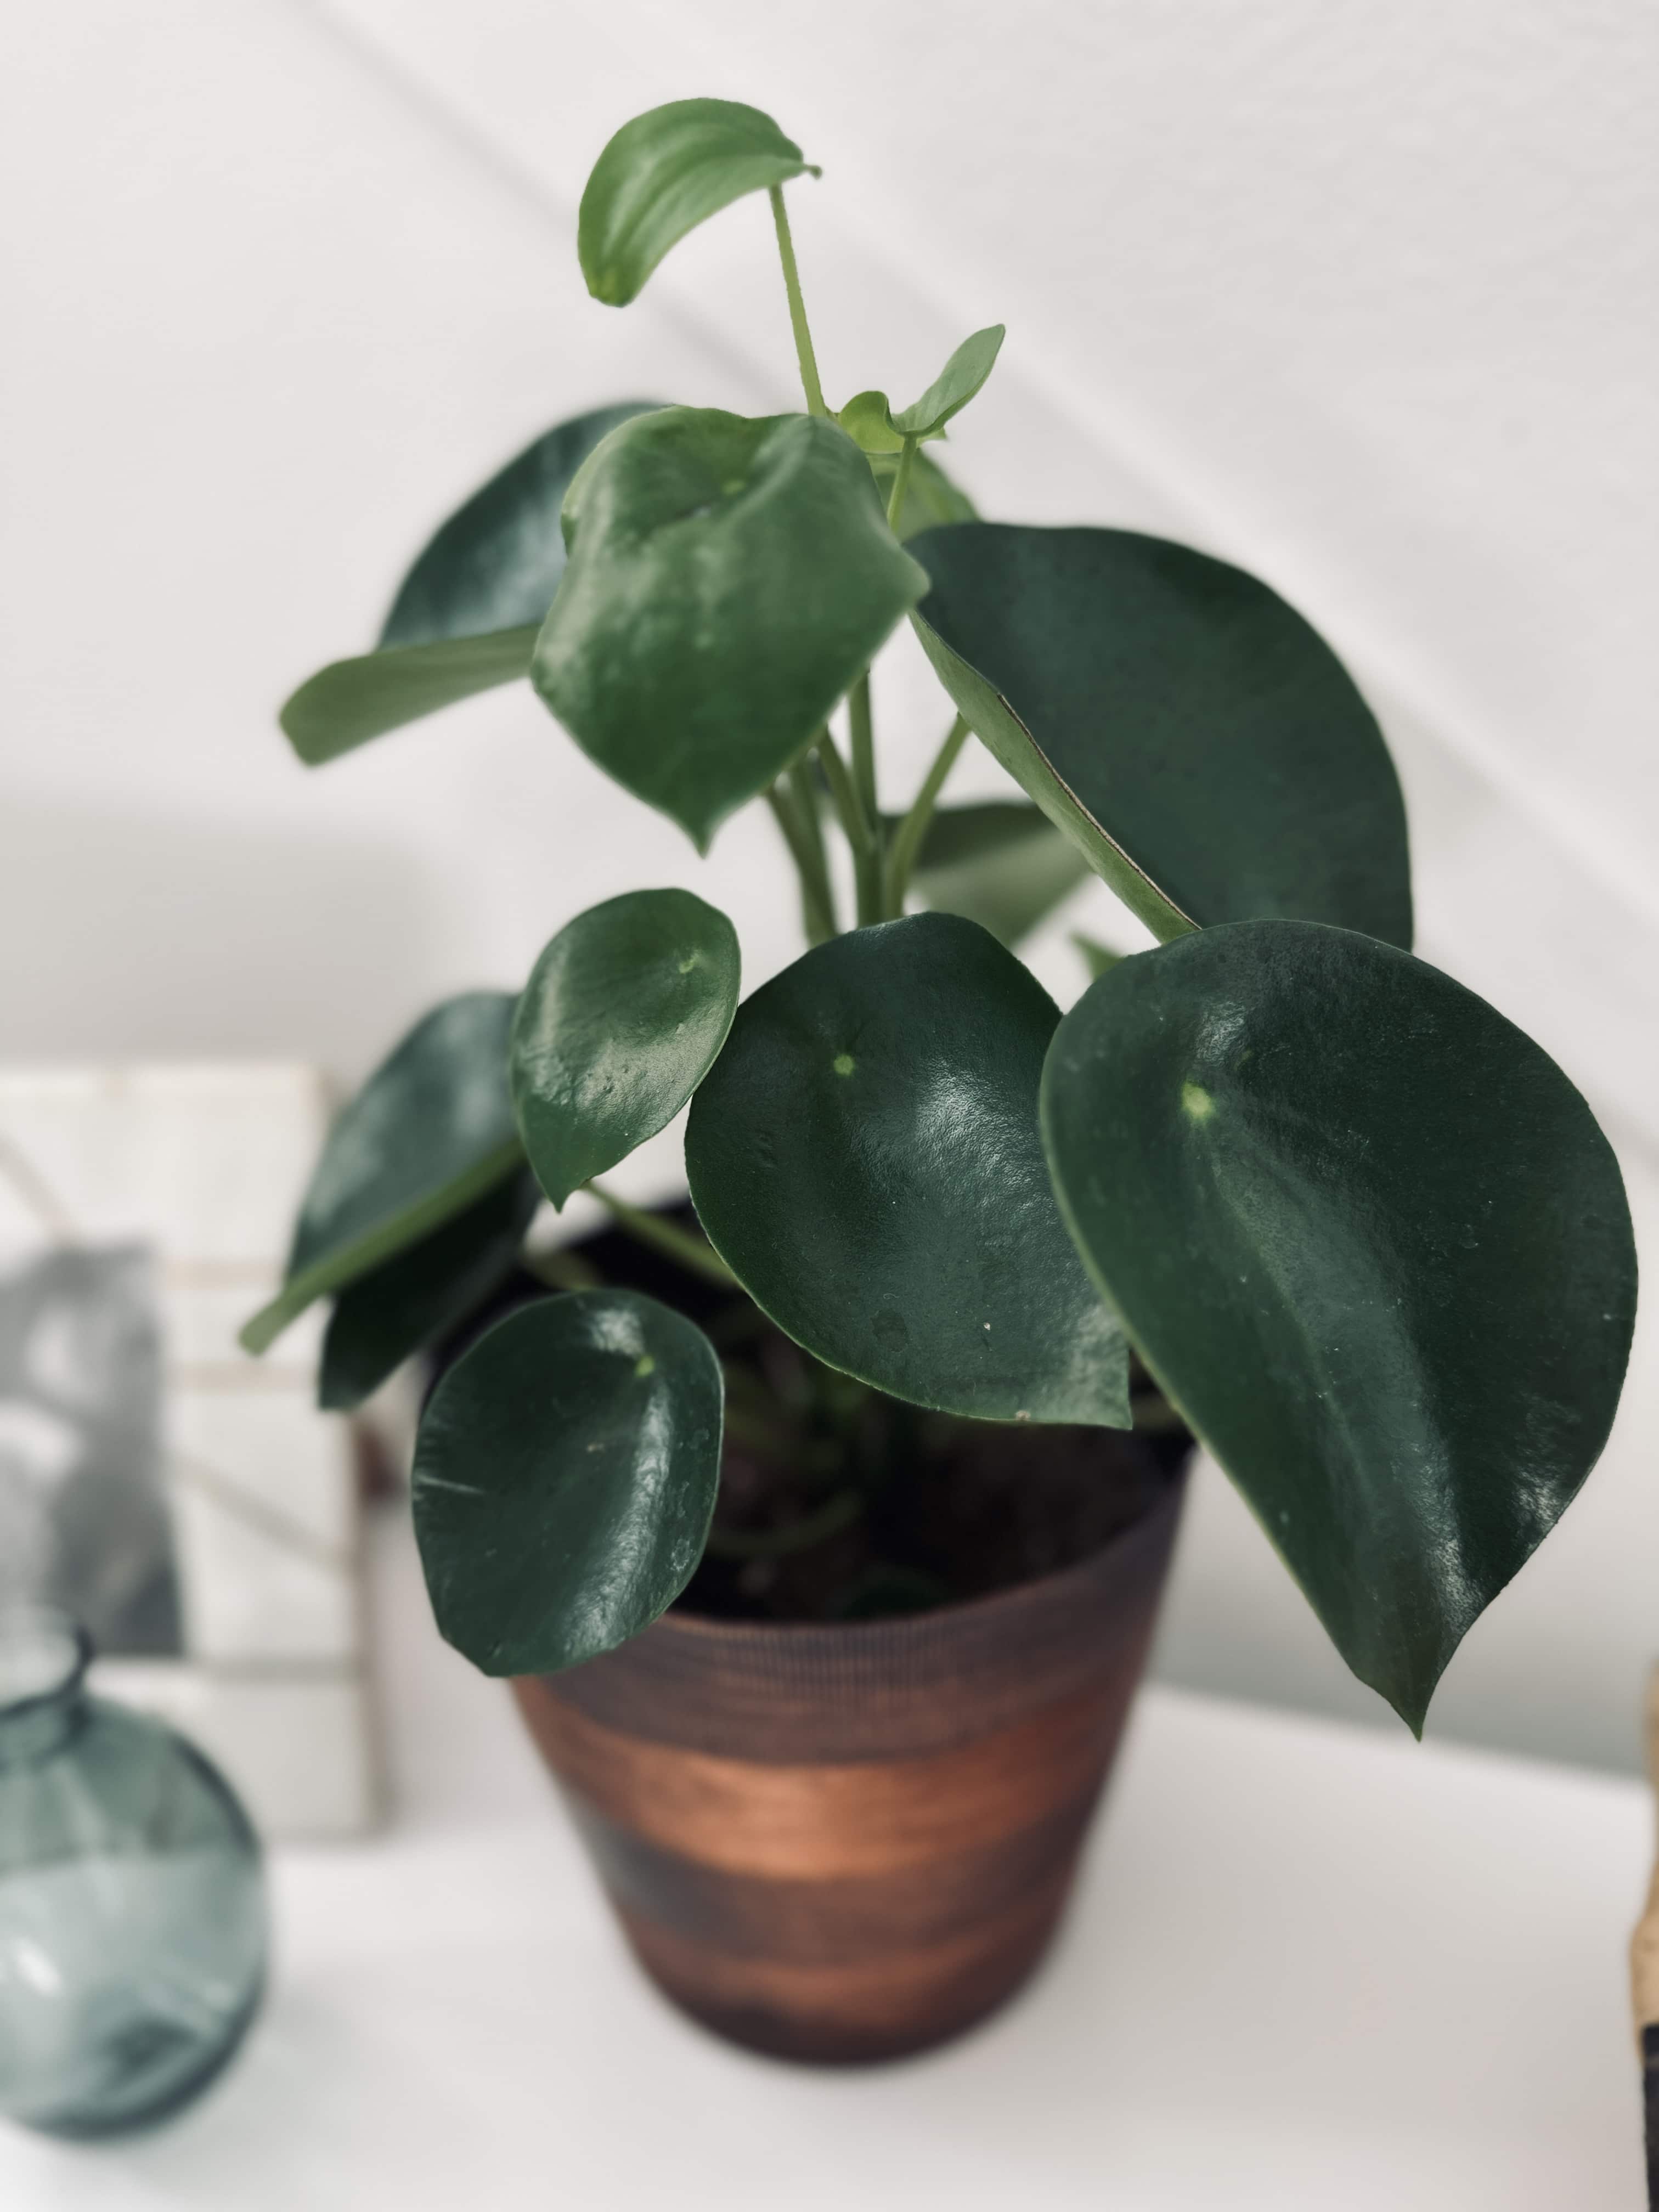 How to Care for Peperomia Plants